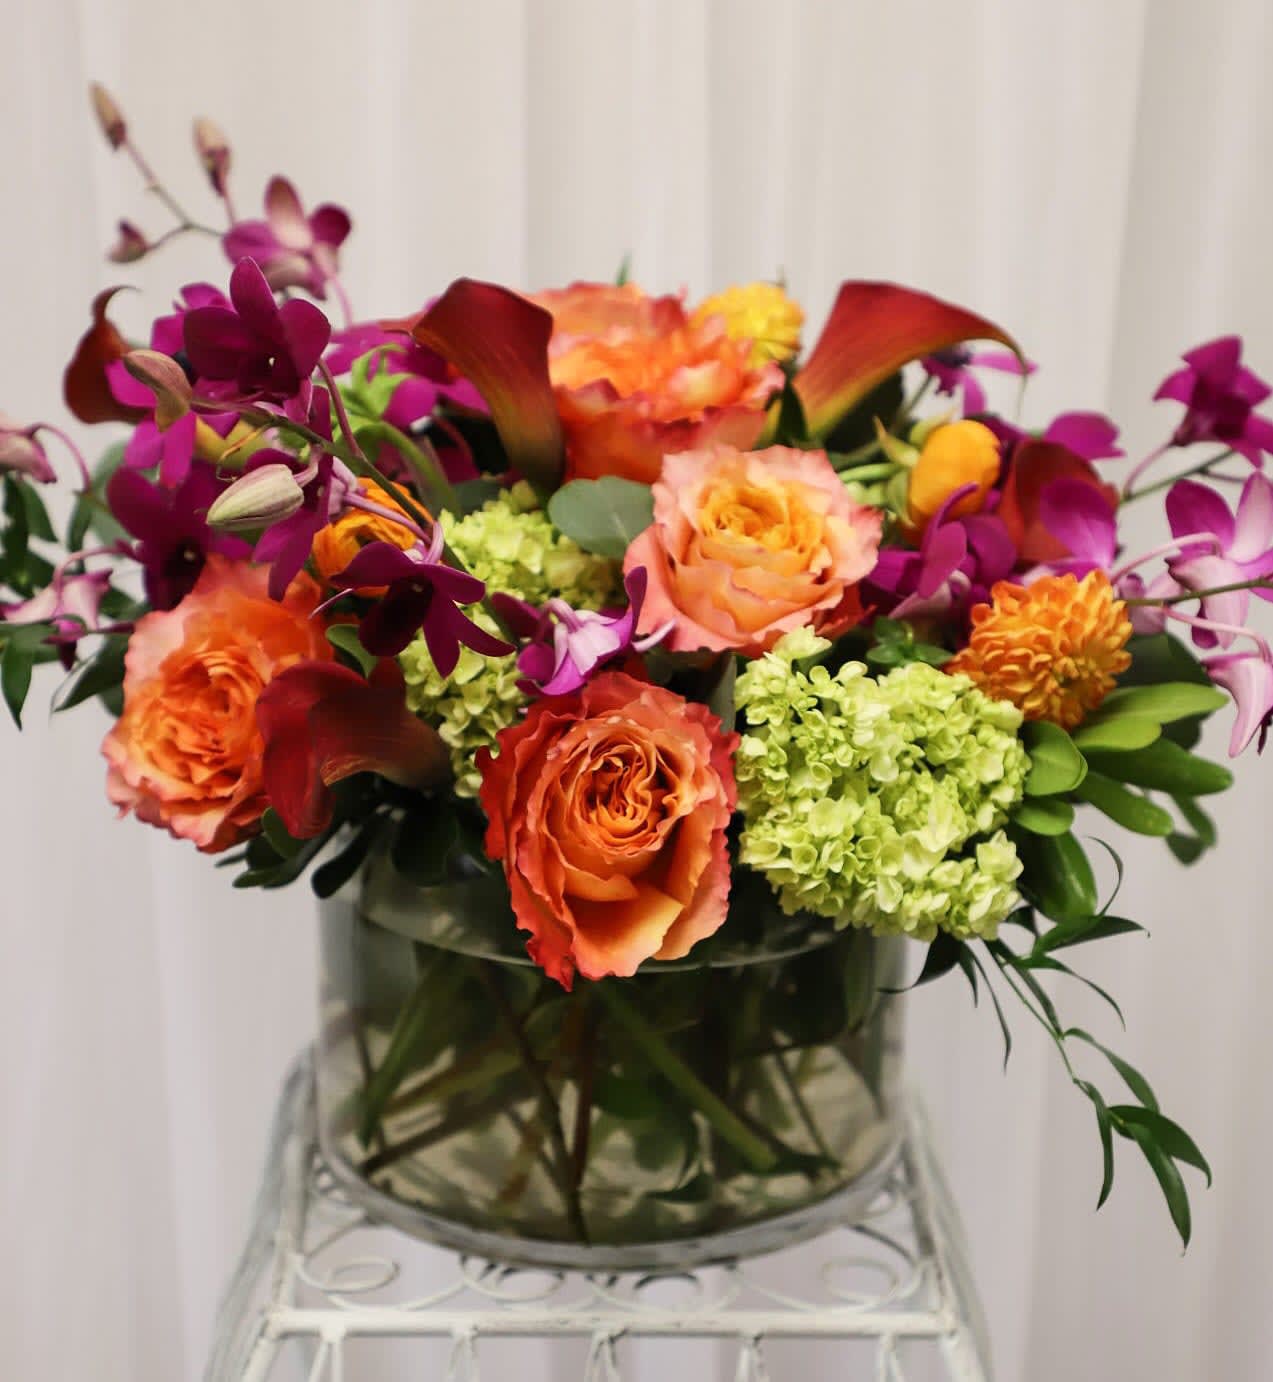 Dior  - This colorful design features brilliant orange and pops of purple blooms.  This gift is sure to breathe new life into any home.